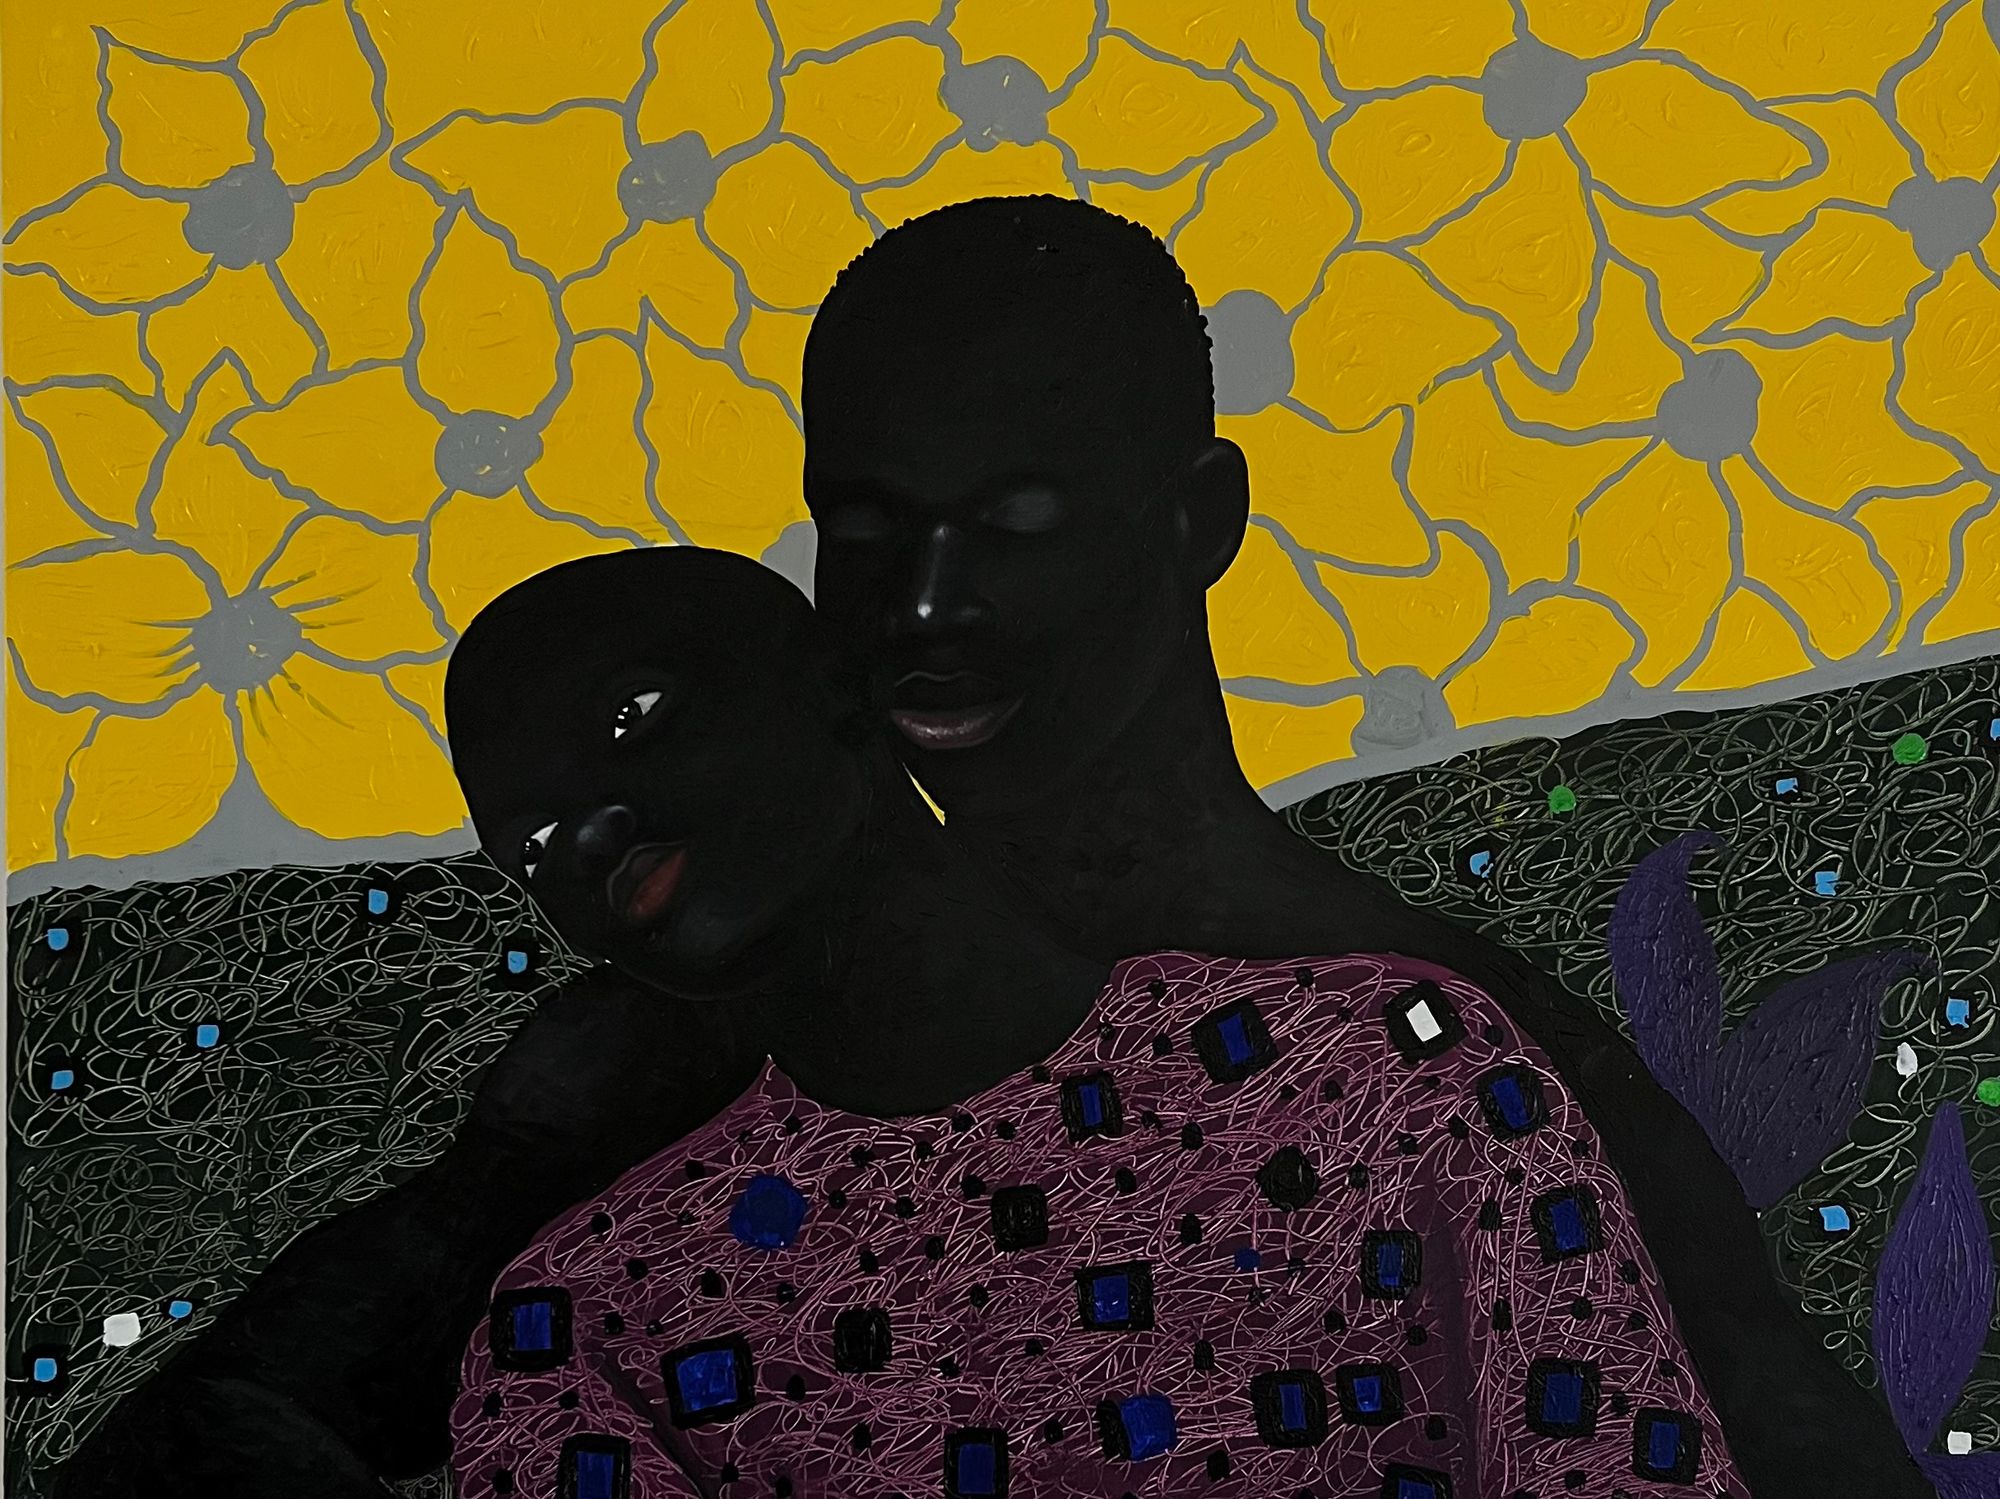 An image of an artwork by Nedia Were of a Black couple embracing against a striking yellow background.